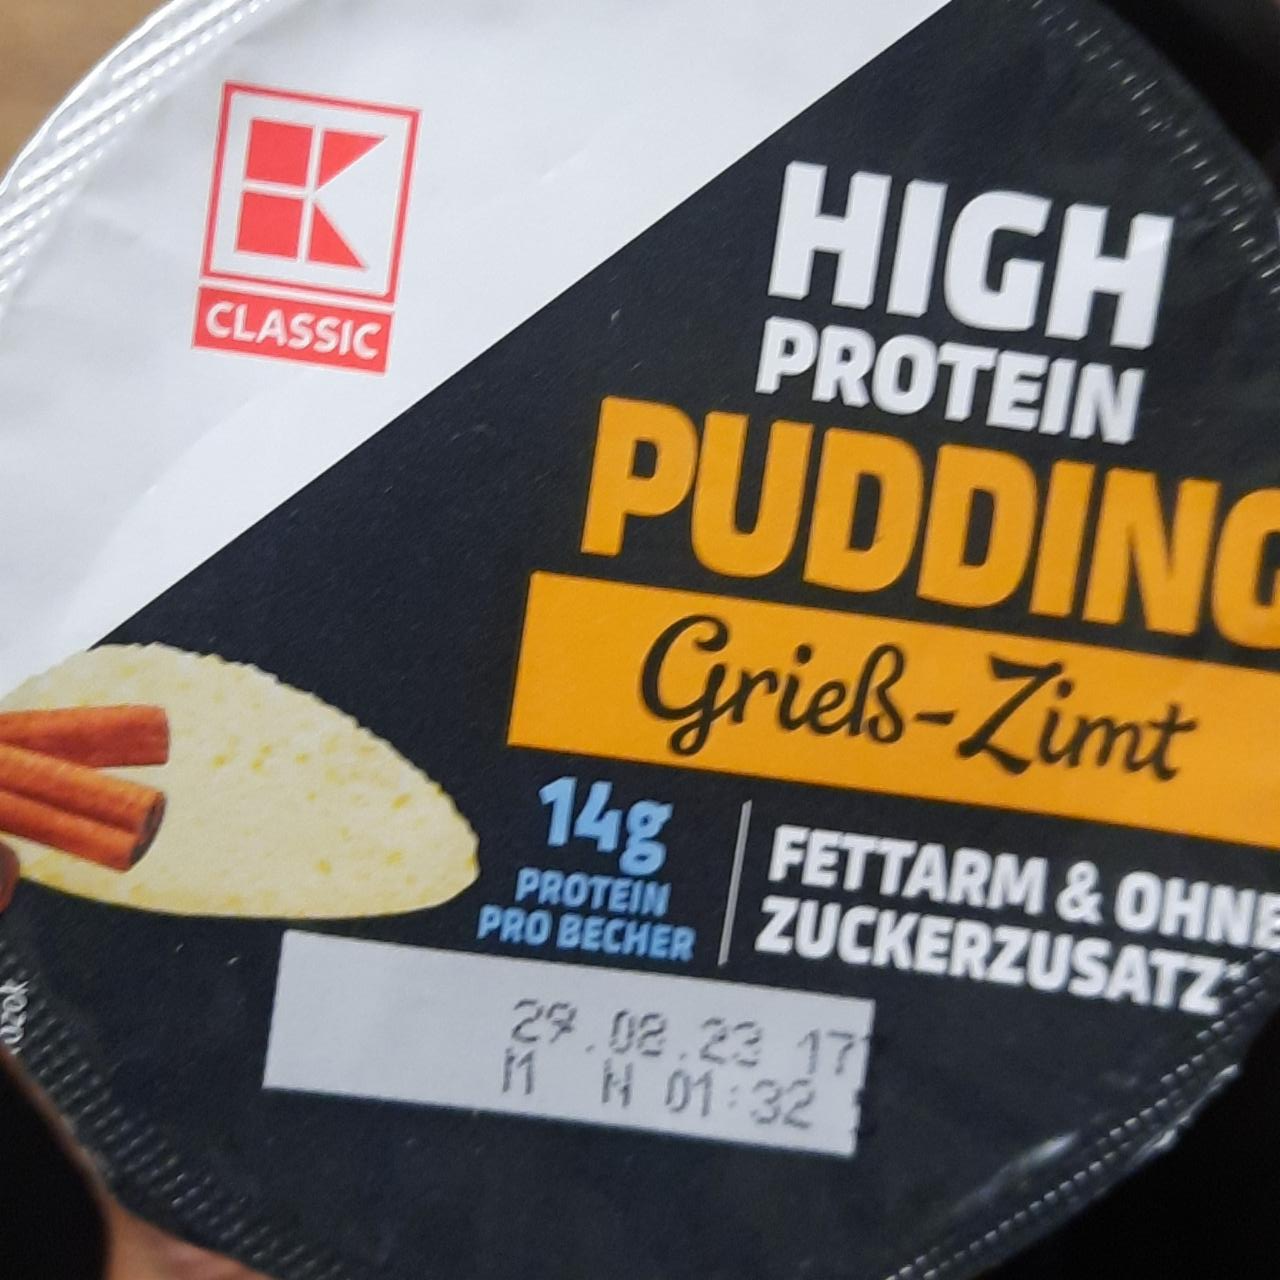 Фото - High protein pudding Greiss-Zimt K-Classic